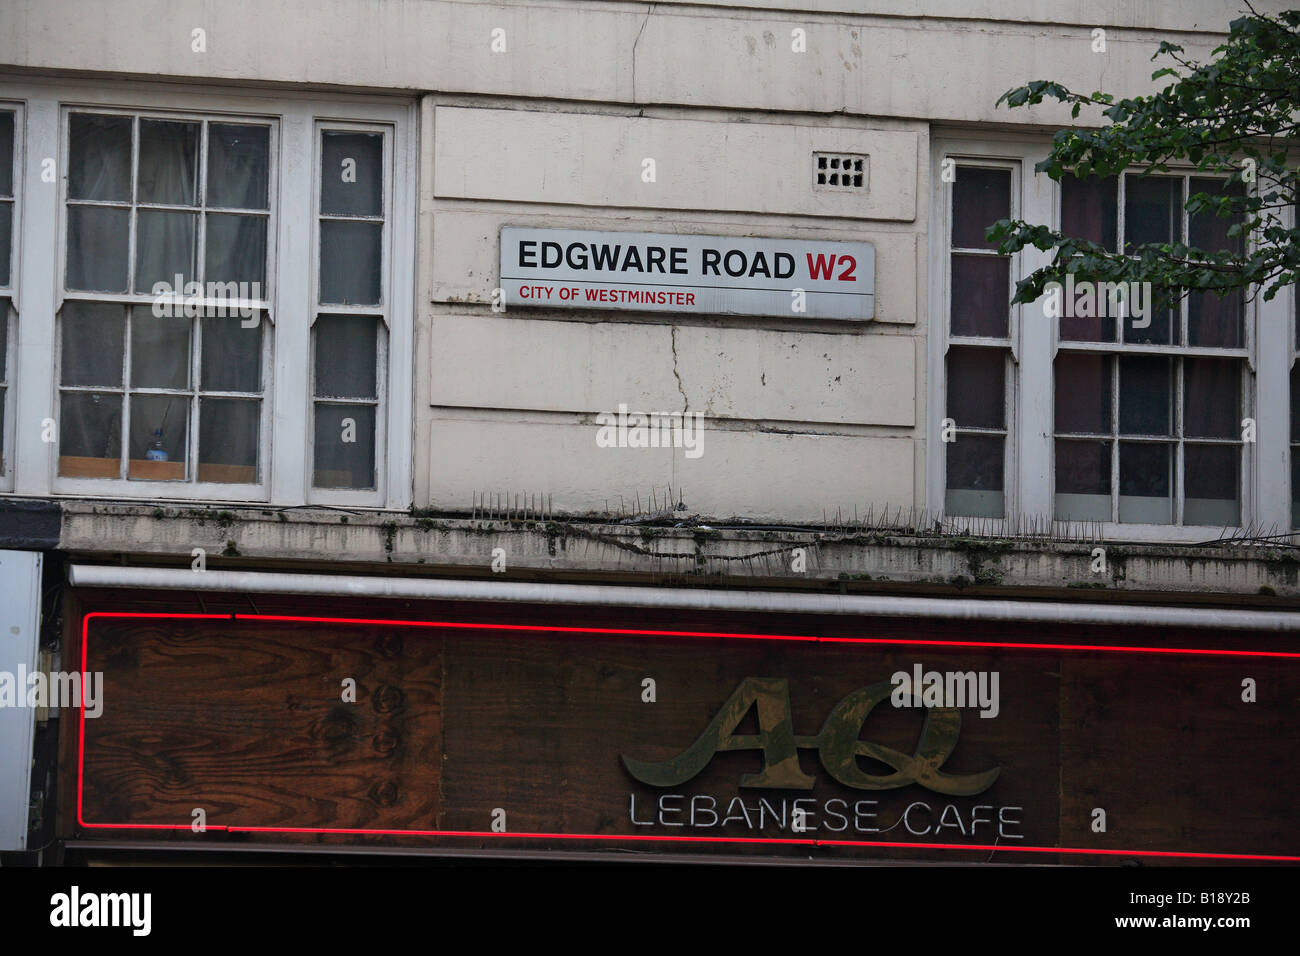 united kingdom central london w2 edgware road street sign and lebanese cafe Stock Photo